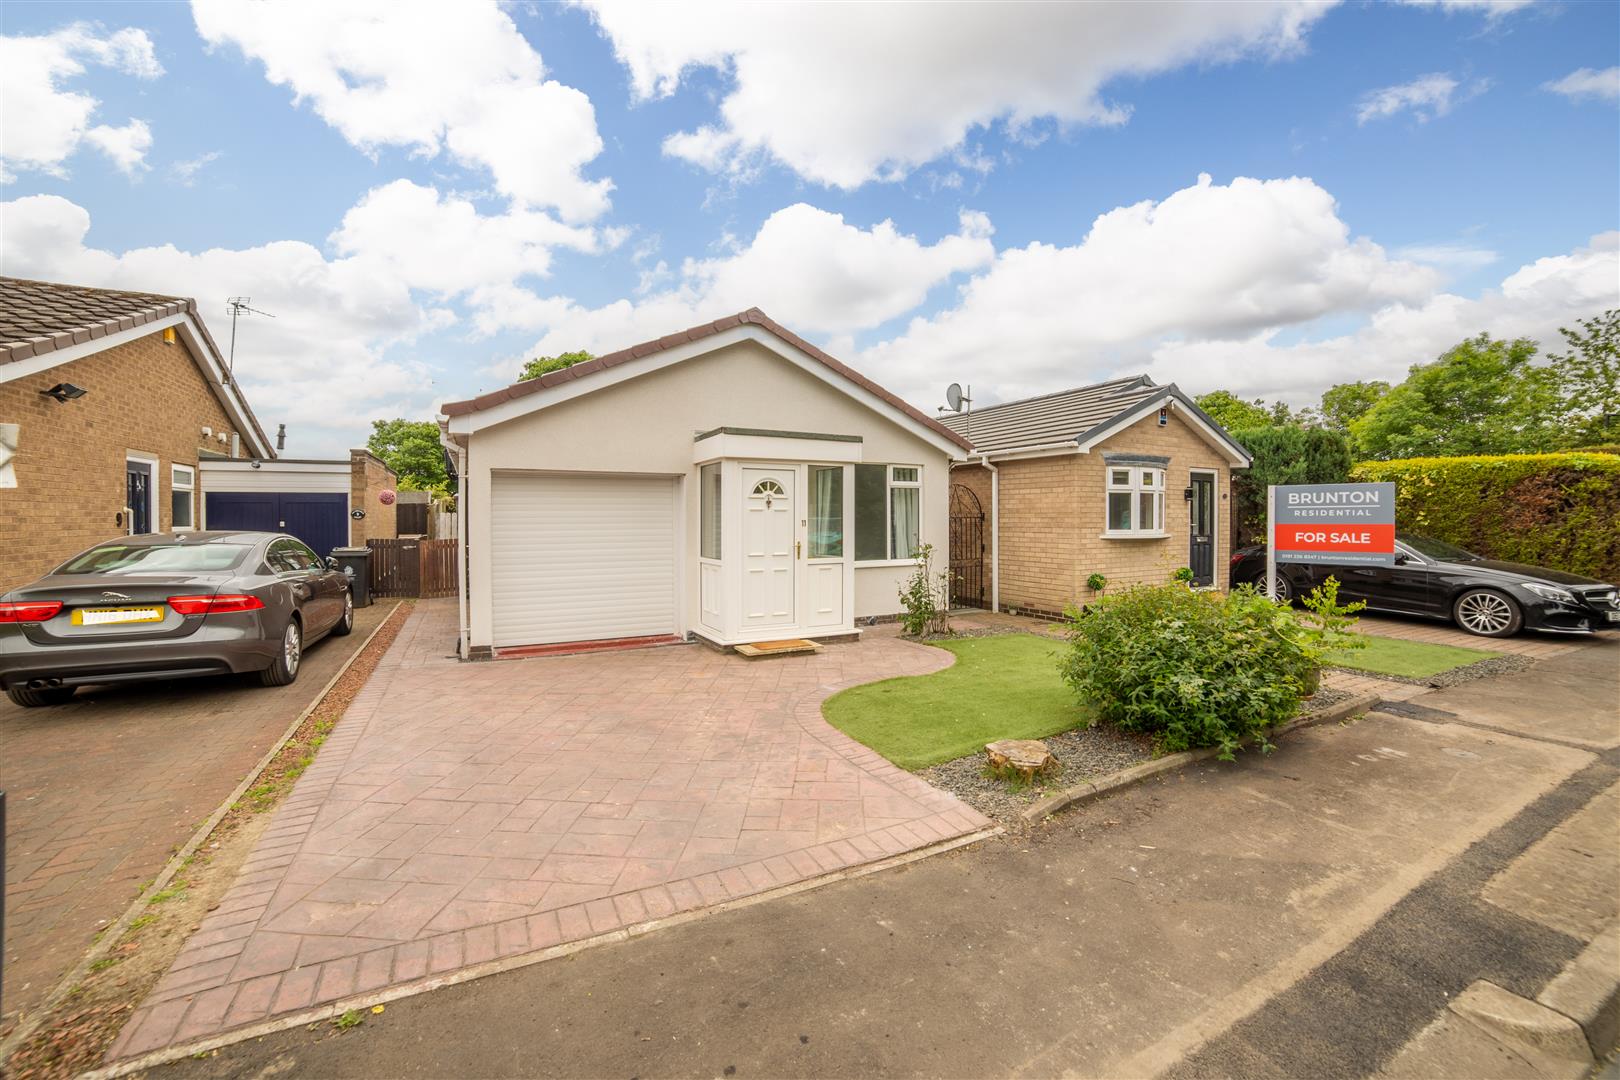 2 bed detached bungalow for sale in Sandford Mews, Wideopen 0